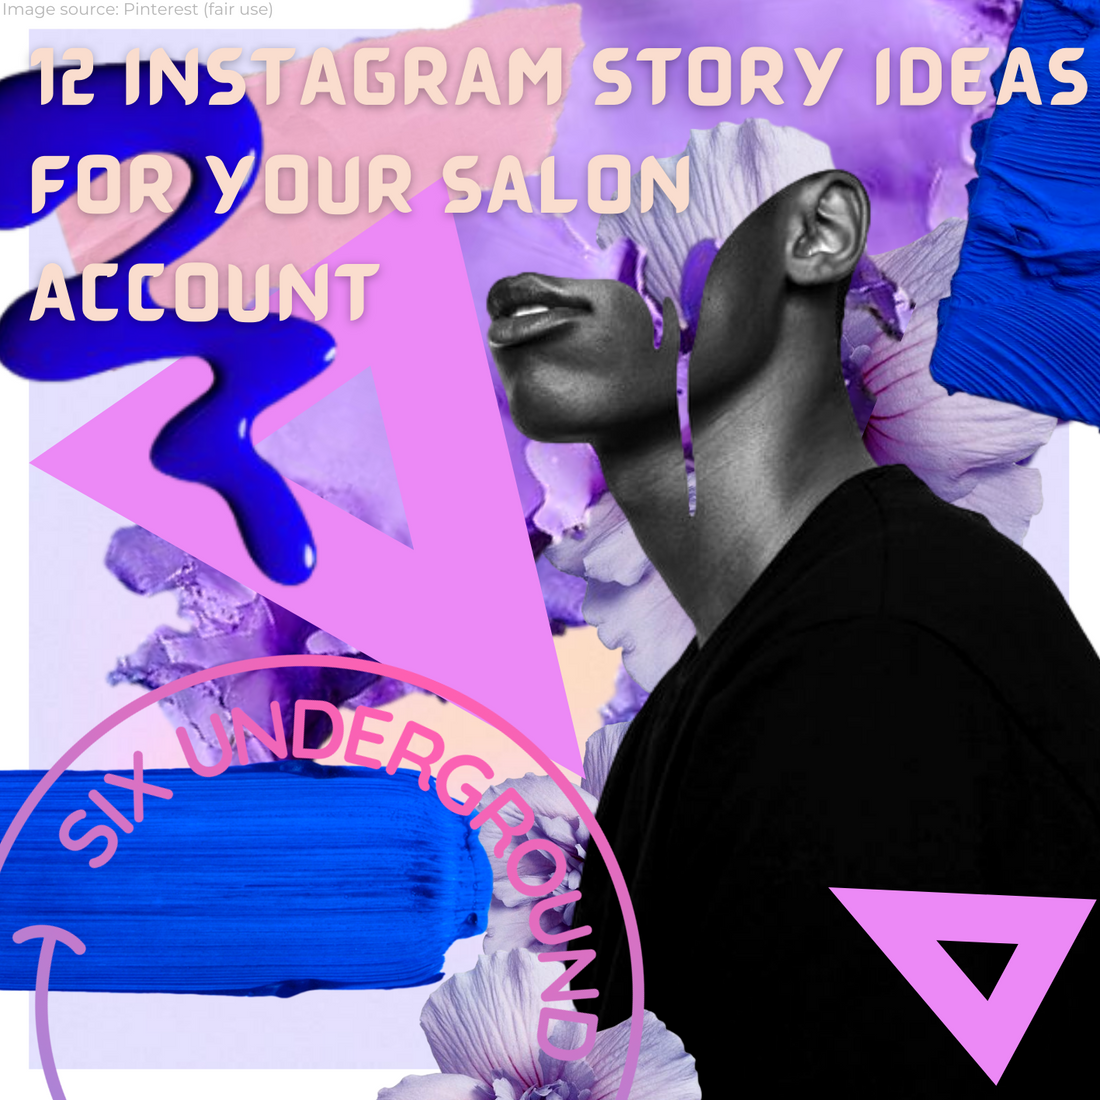 12 Instagram Story Ideas for Your Salon